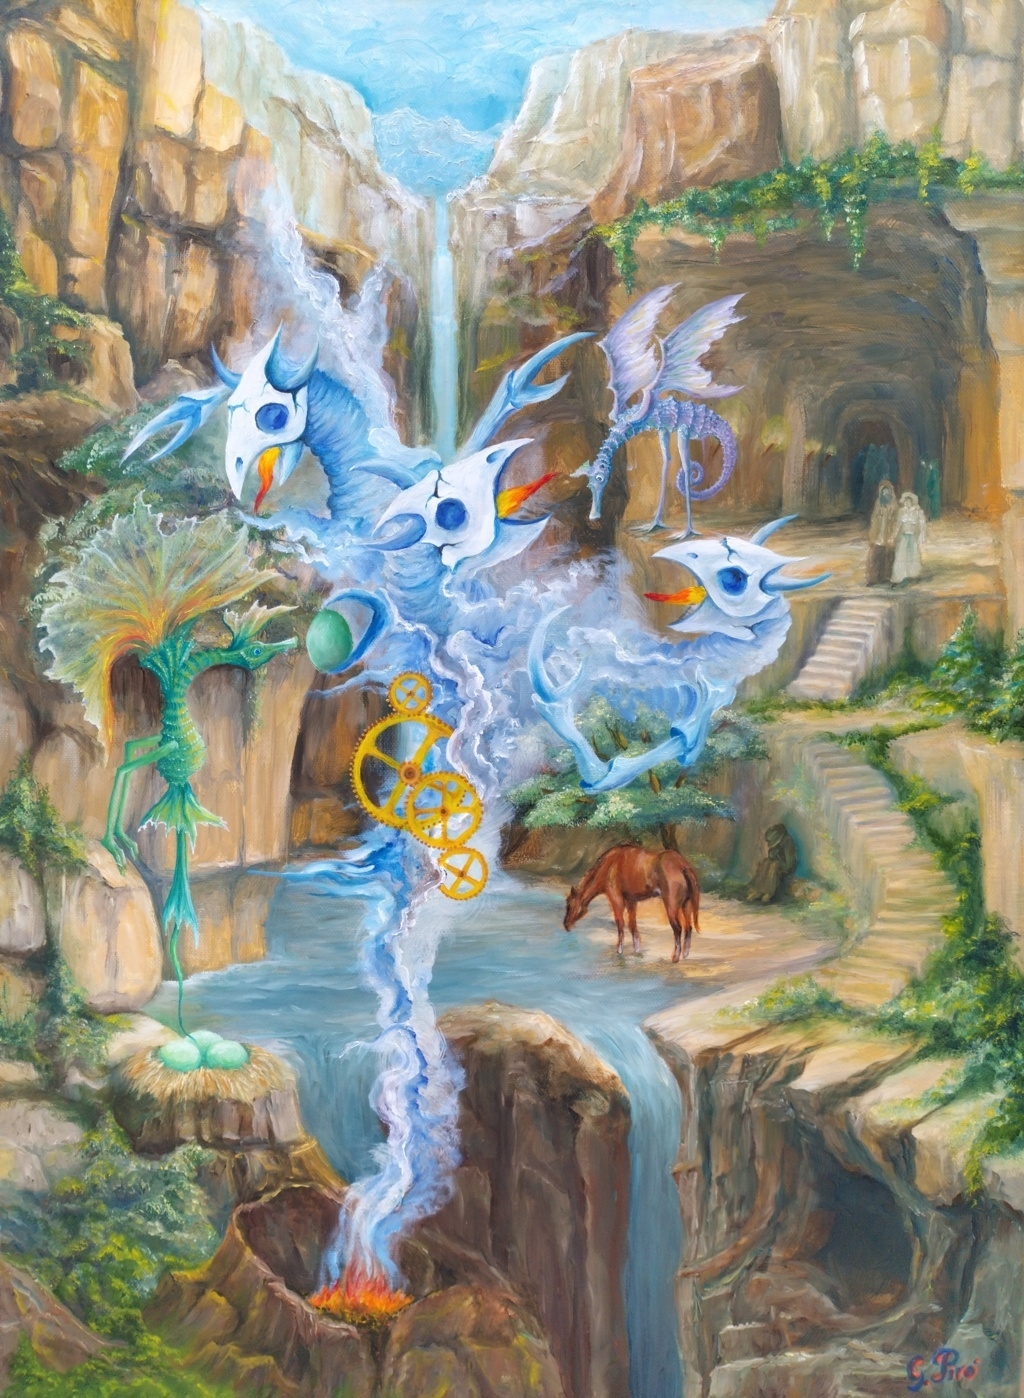 oil painting, gregory pyra piro, surrealism, nature, landscape, winged seahorse-like creatures, green eggs, nests, cinder cone volcano, demons, ravine, rocks, green vegetation, waterfalls, horse, caves